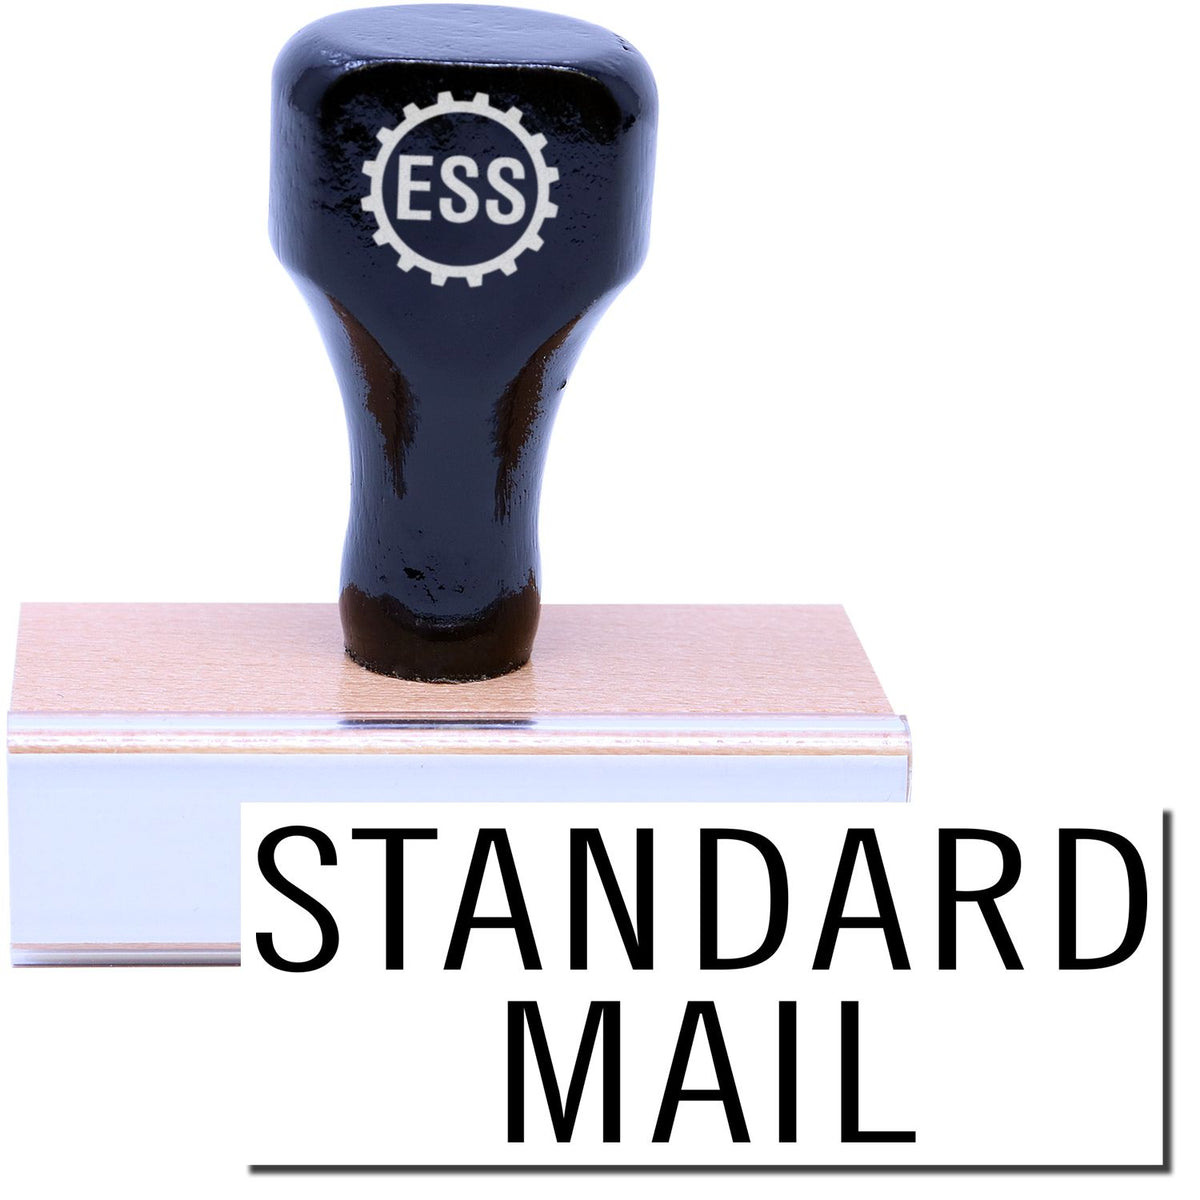 Standard Mail Stacked Rubber Stamp